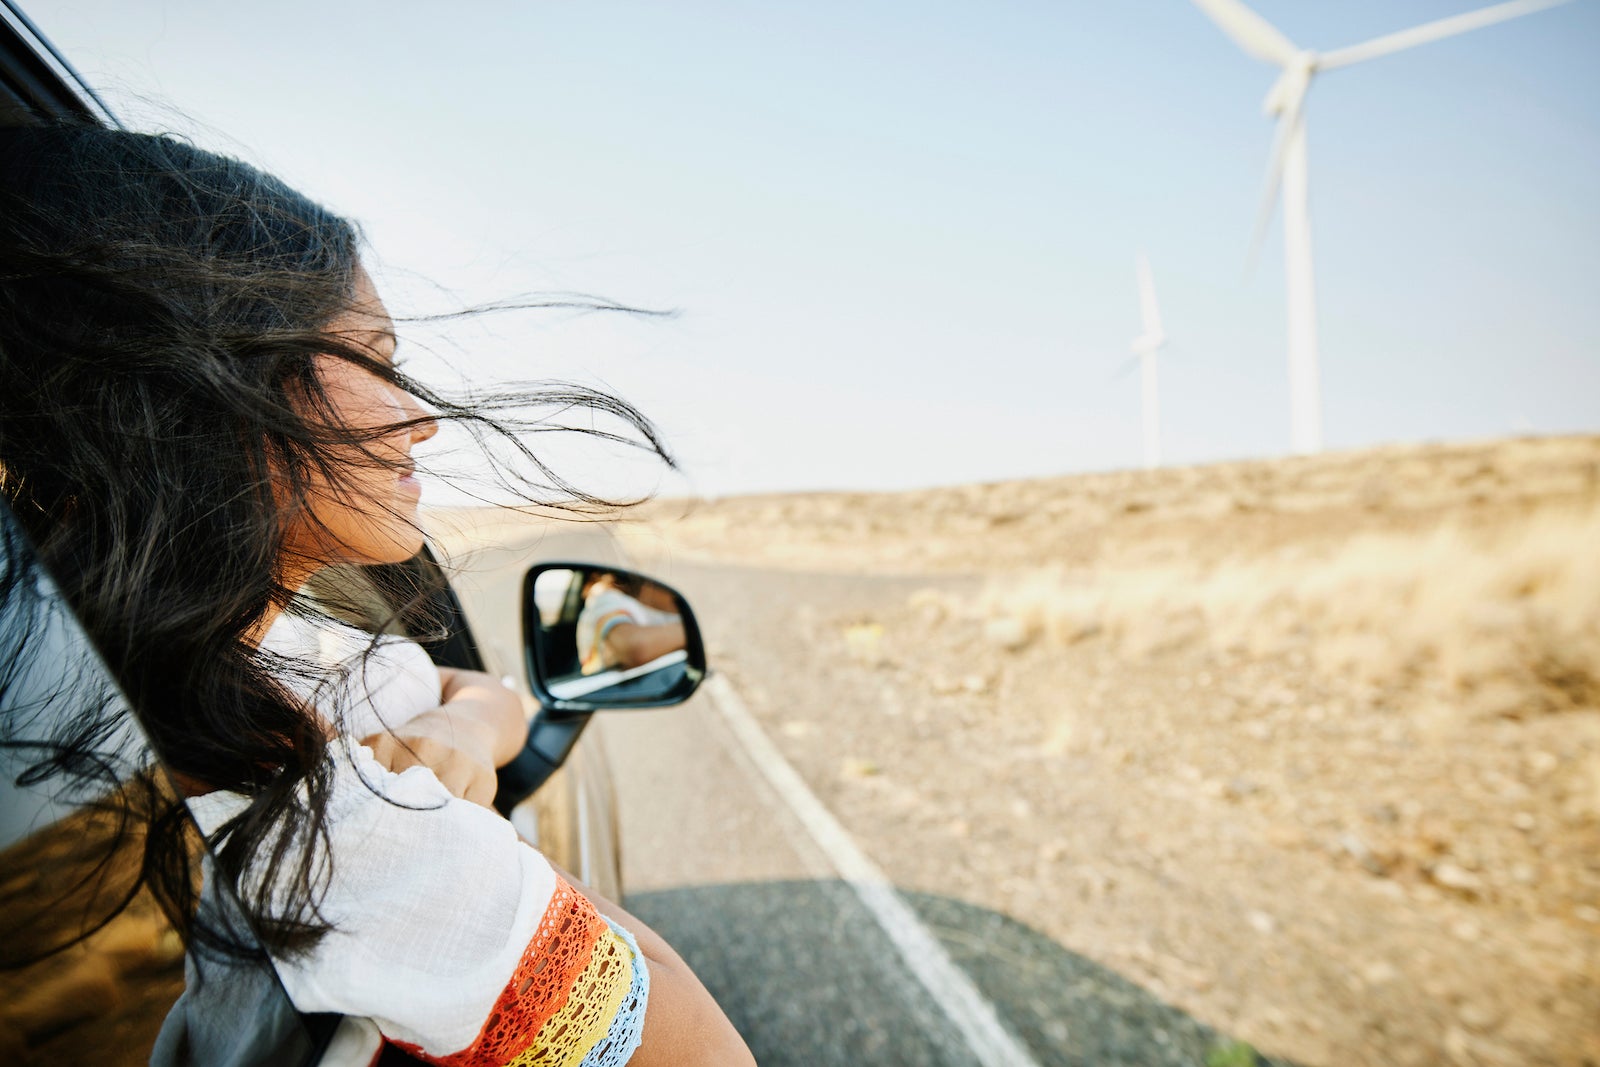 Smiling teenage girl with head out car window and hair blowing in wind passing wind turbines in desert